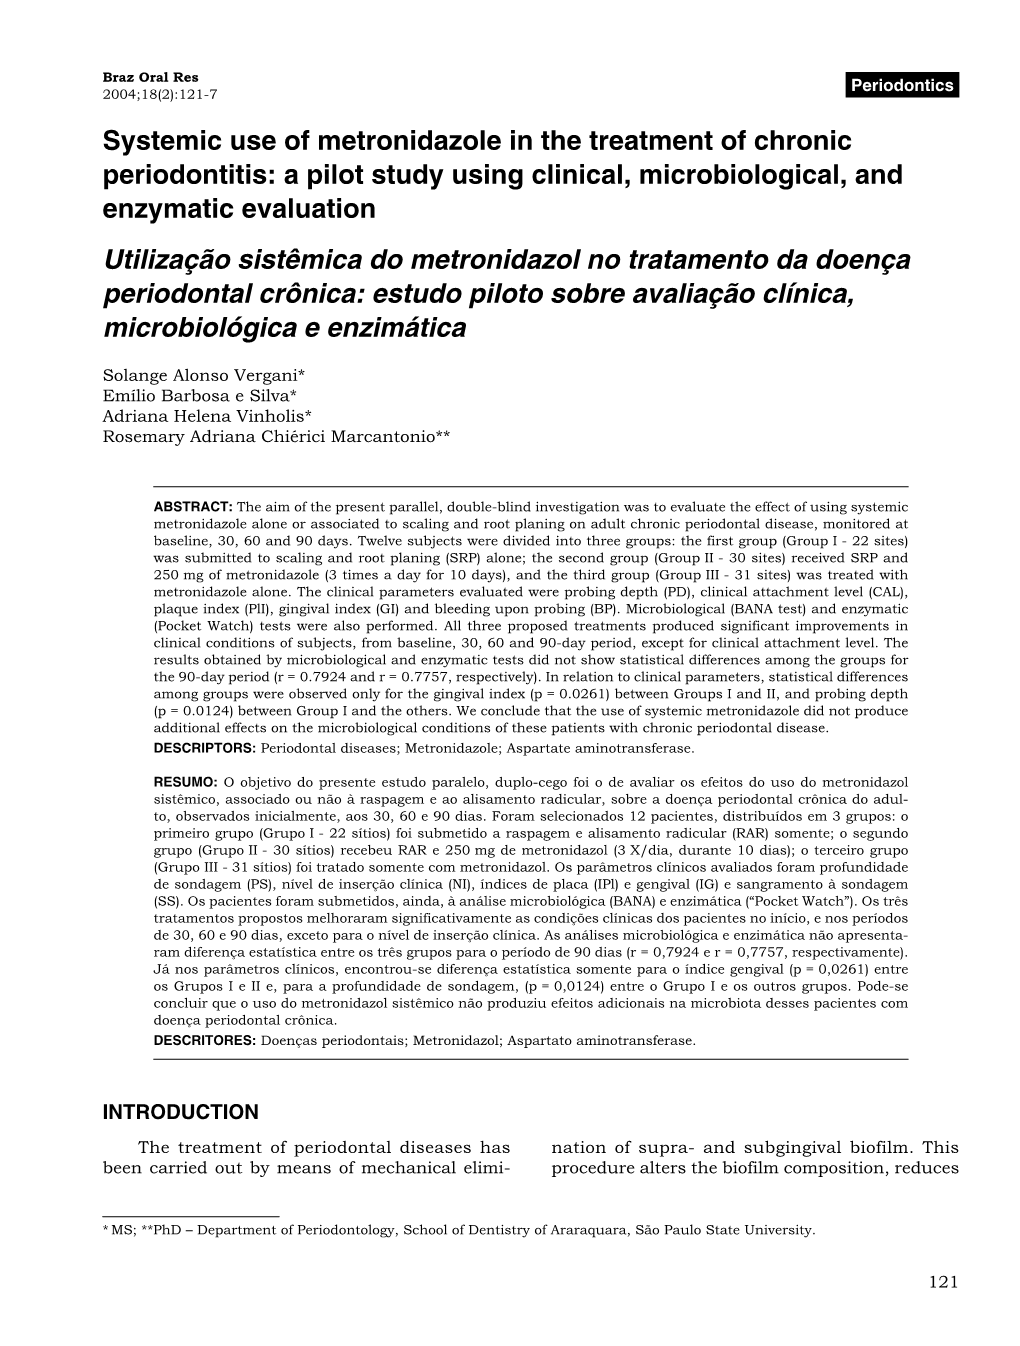 Systemic Use of Metronidazole in the Treatment of Chronic Periodontitis